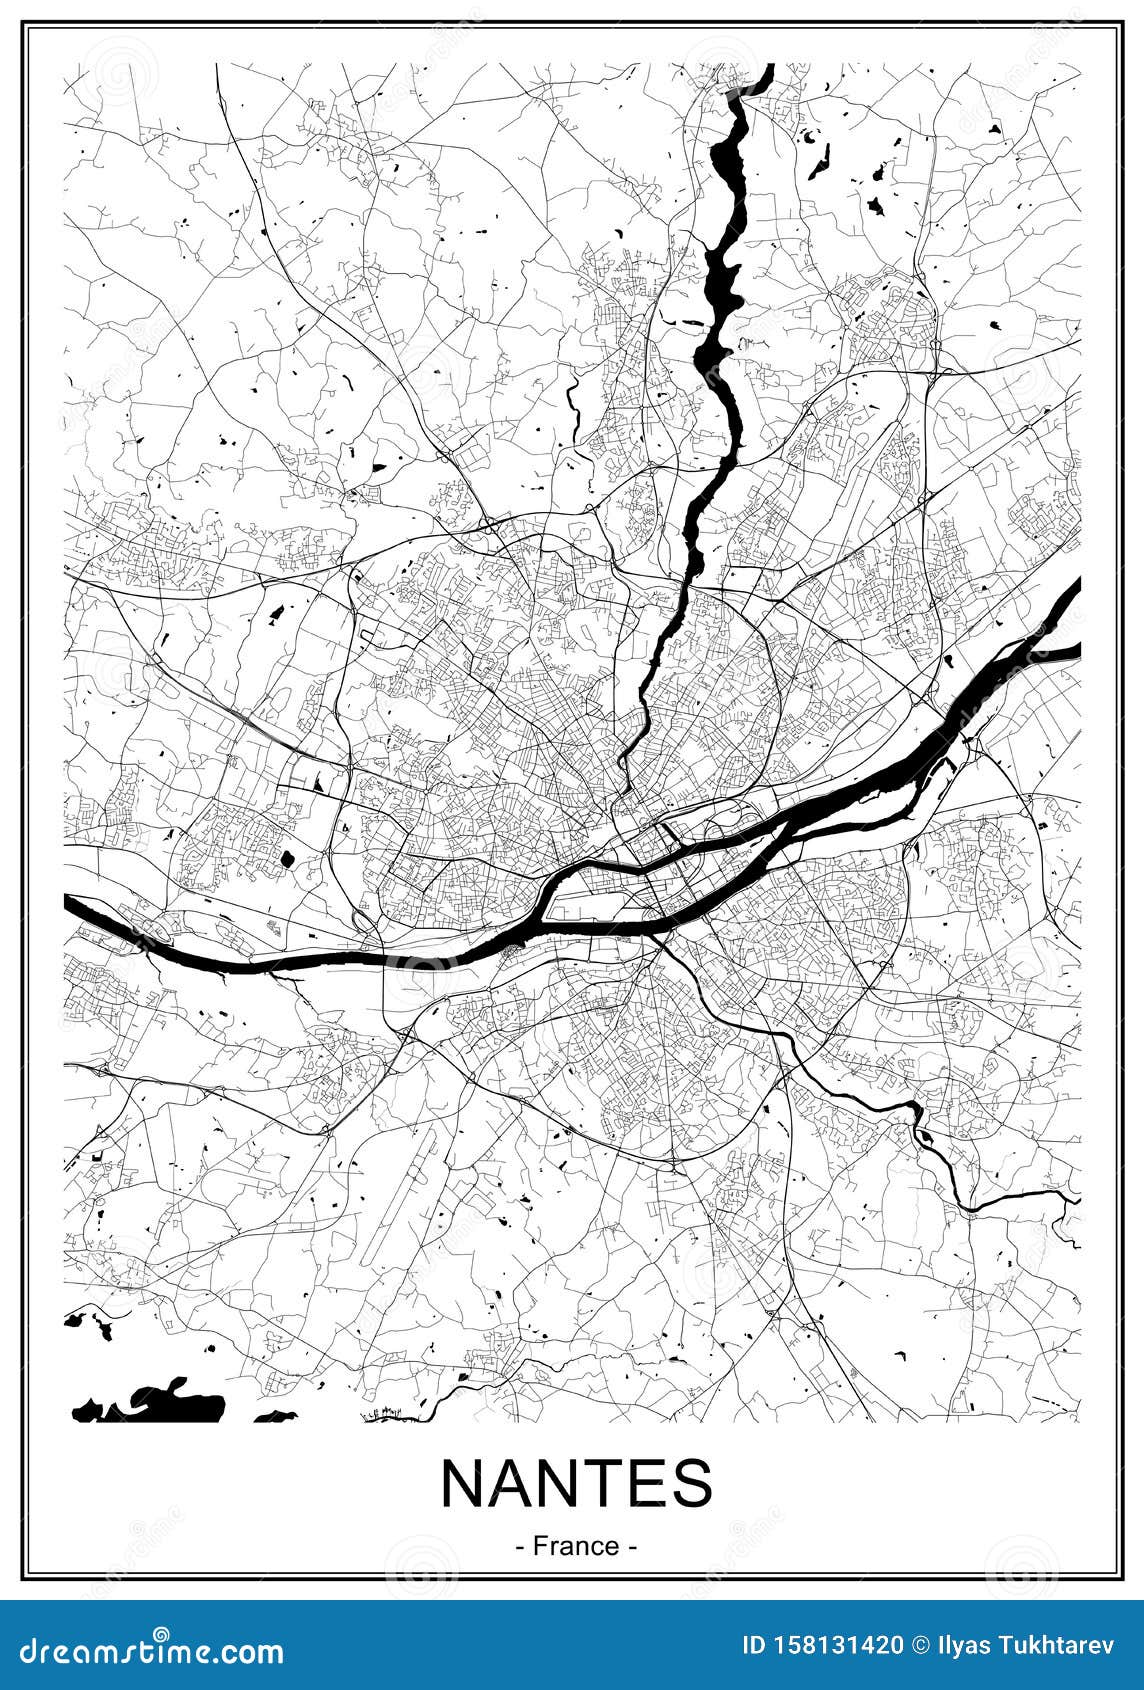 map of the city of nantes, france